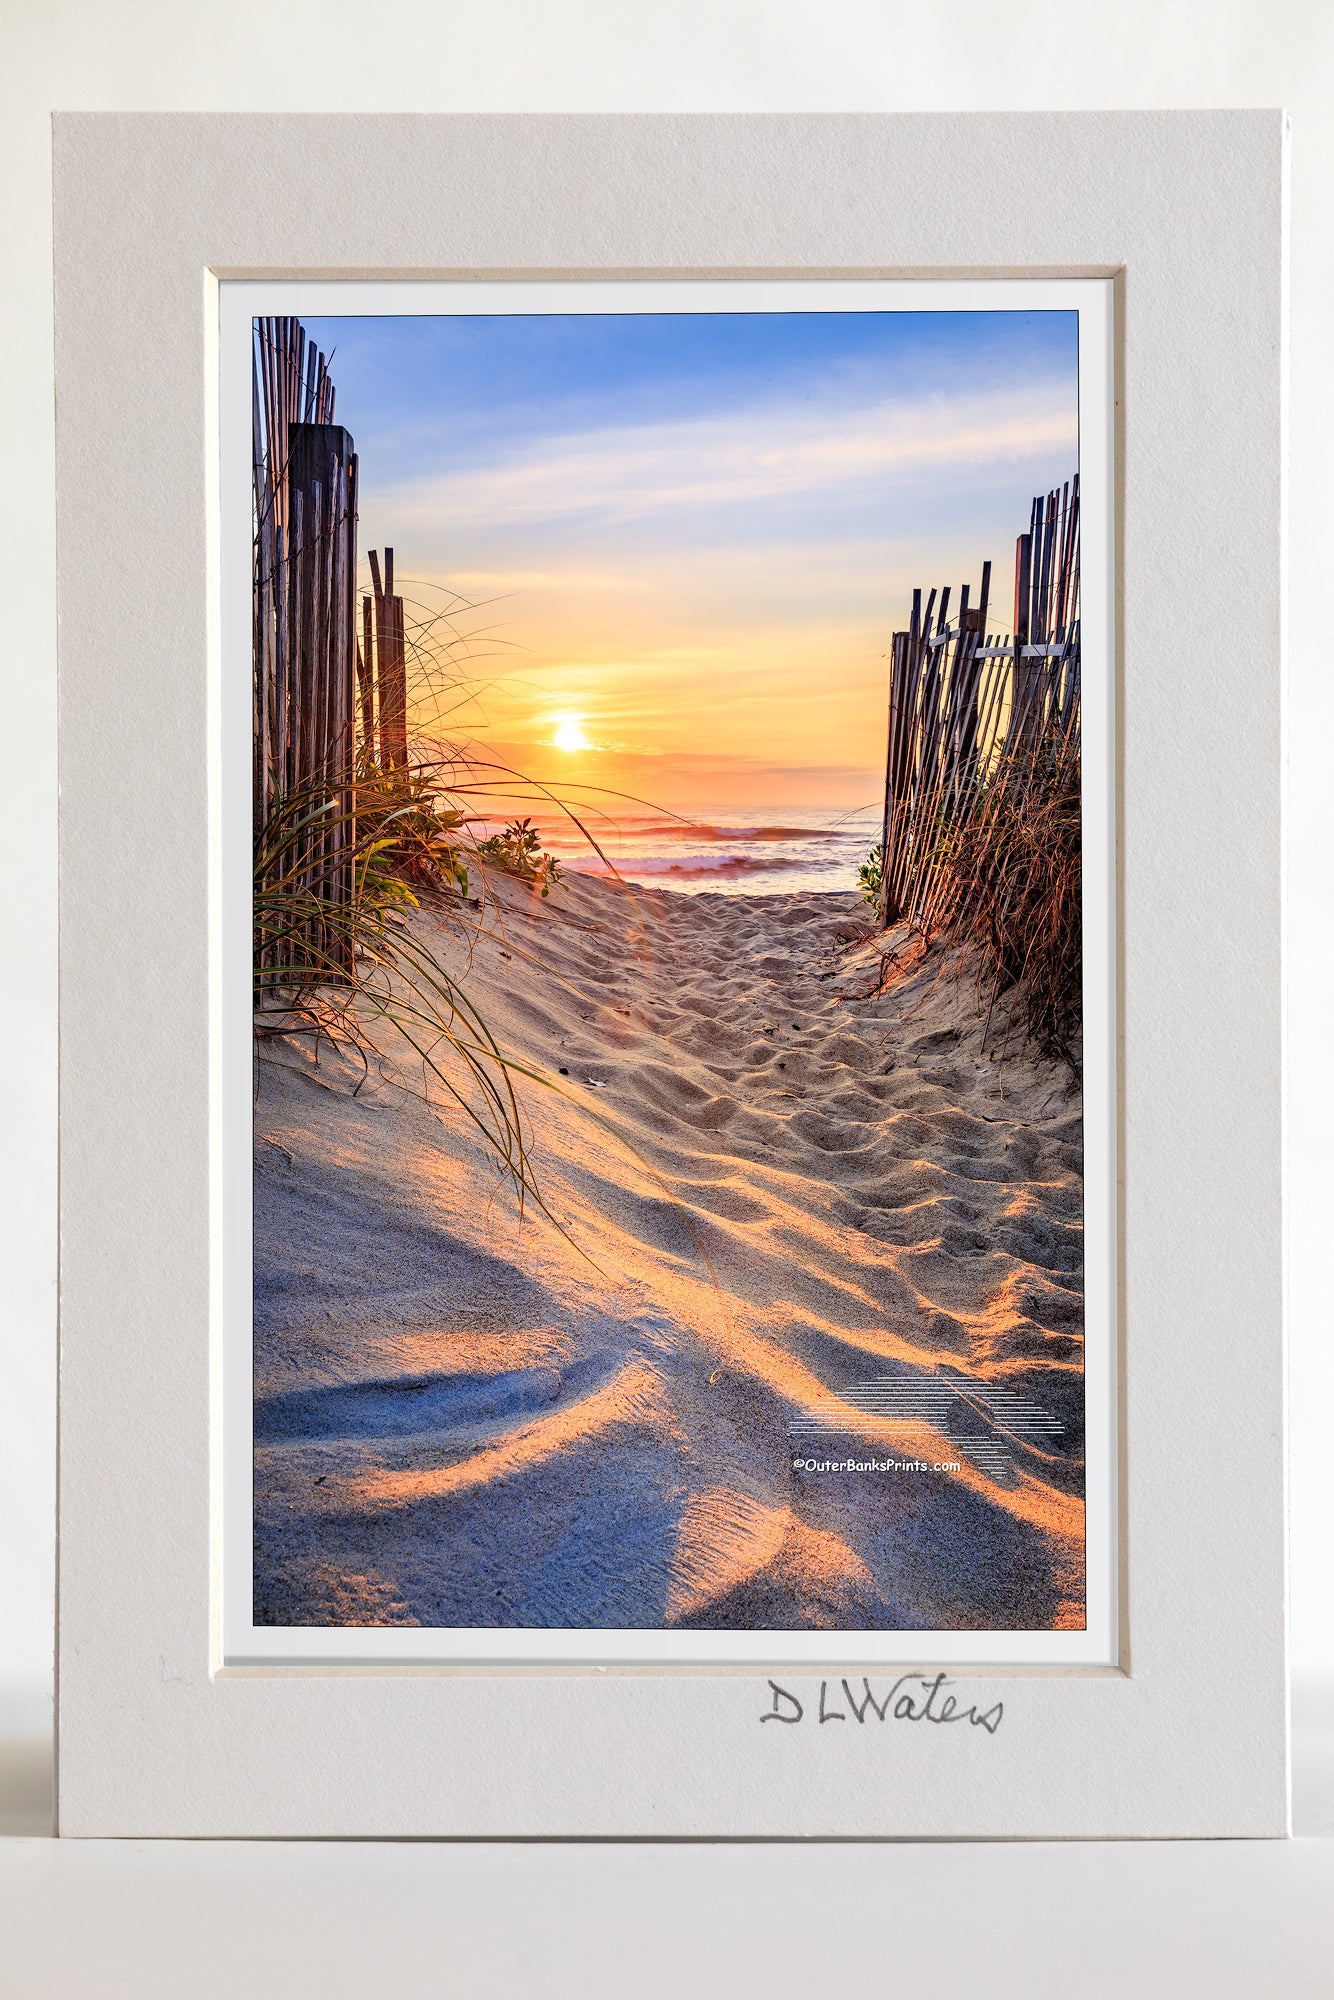 4 x 6 luster print in a 5 x 7 ivory mat of  Kitty Hawk beach access at sunrise on the Outer Banks, NC. It's interesting how the sunlight plays across the foot prints in the sand.